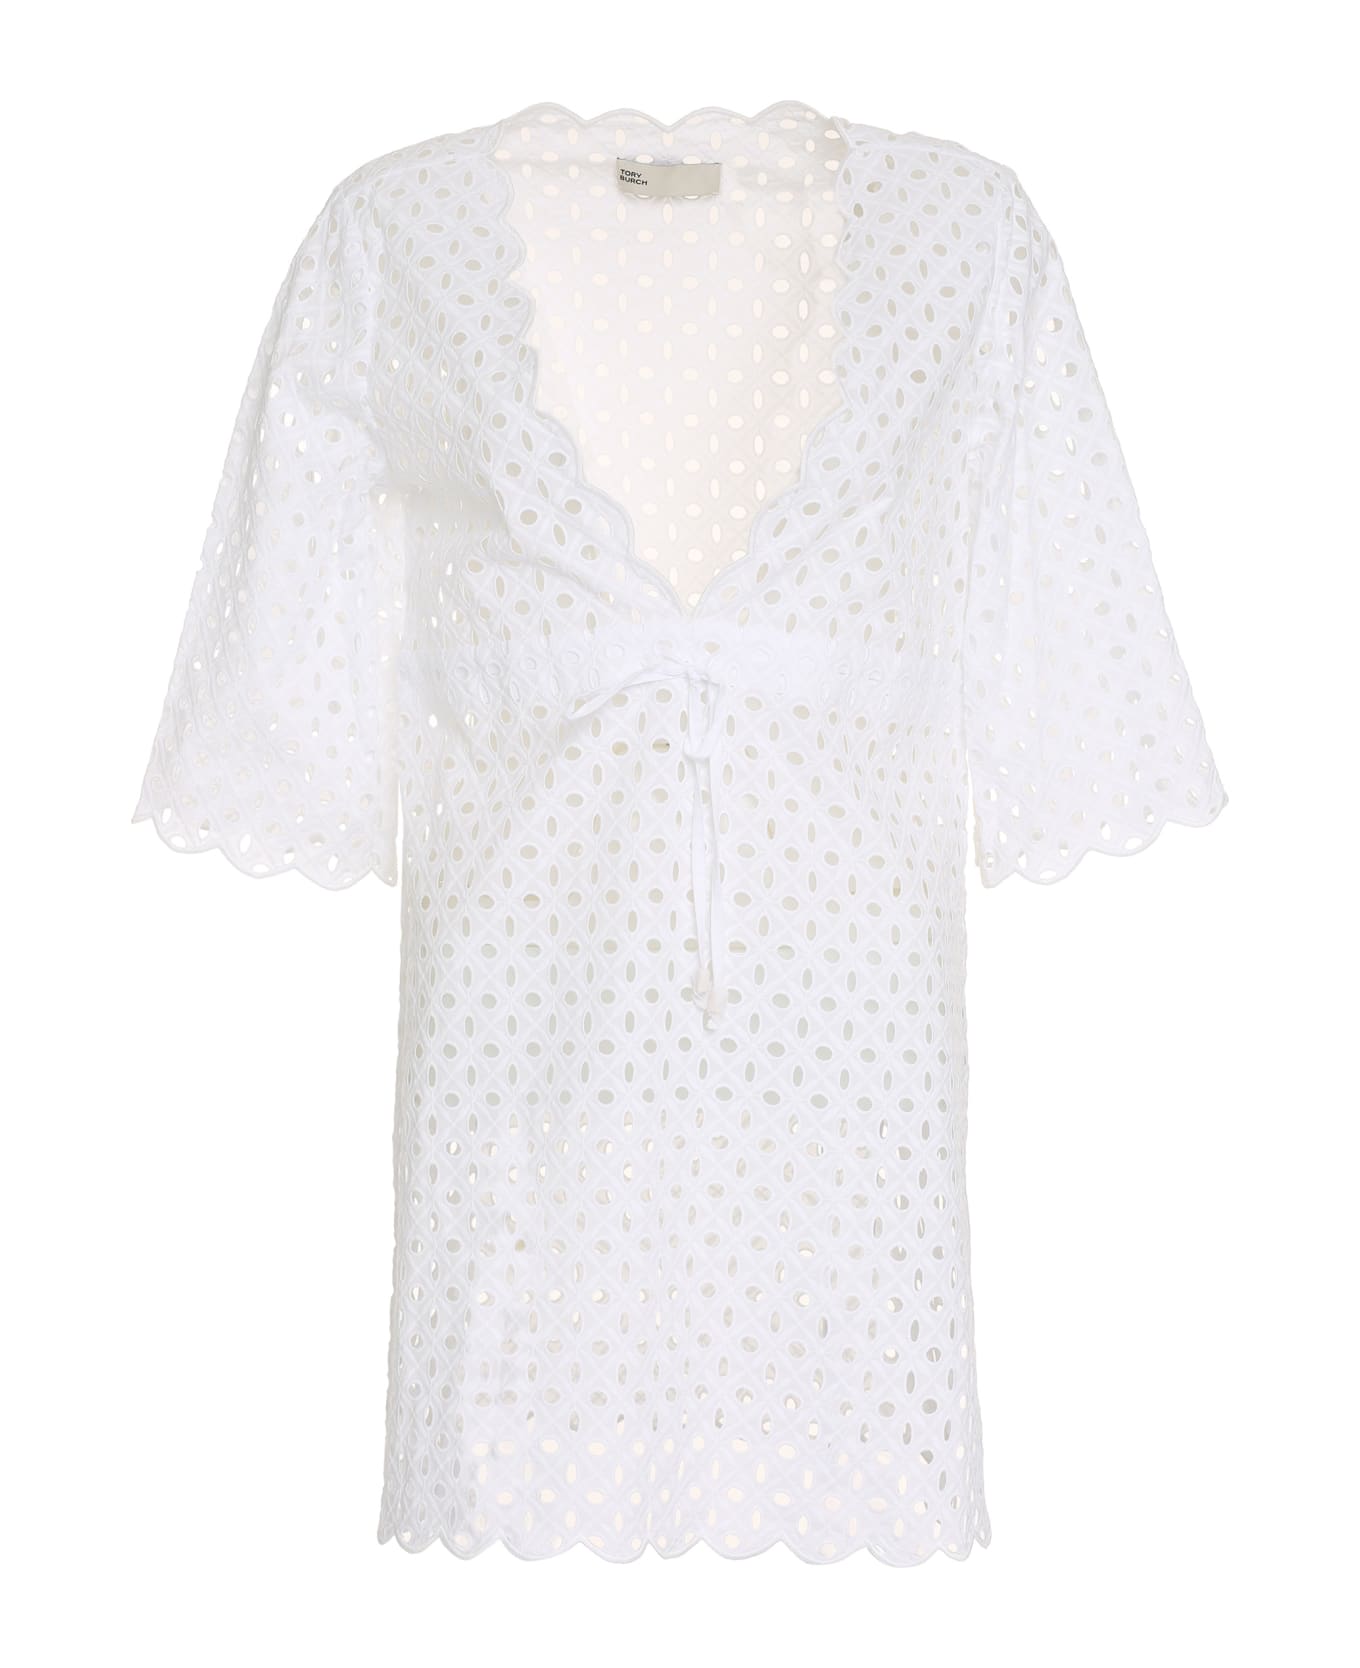 Tory Burch Dress In Cotton - White